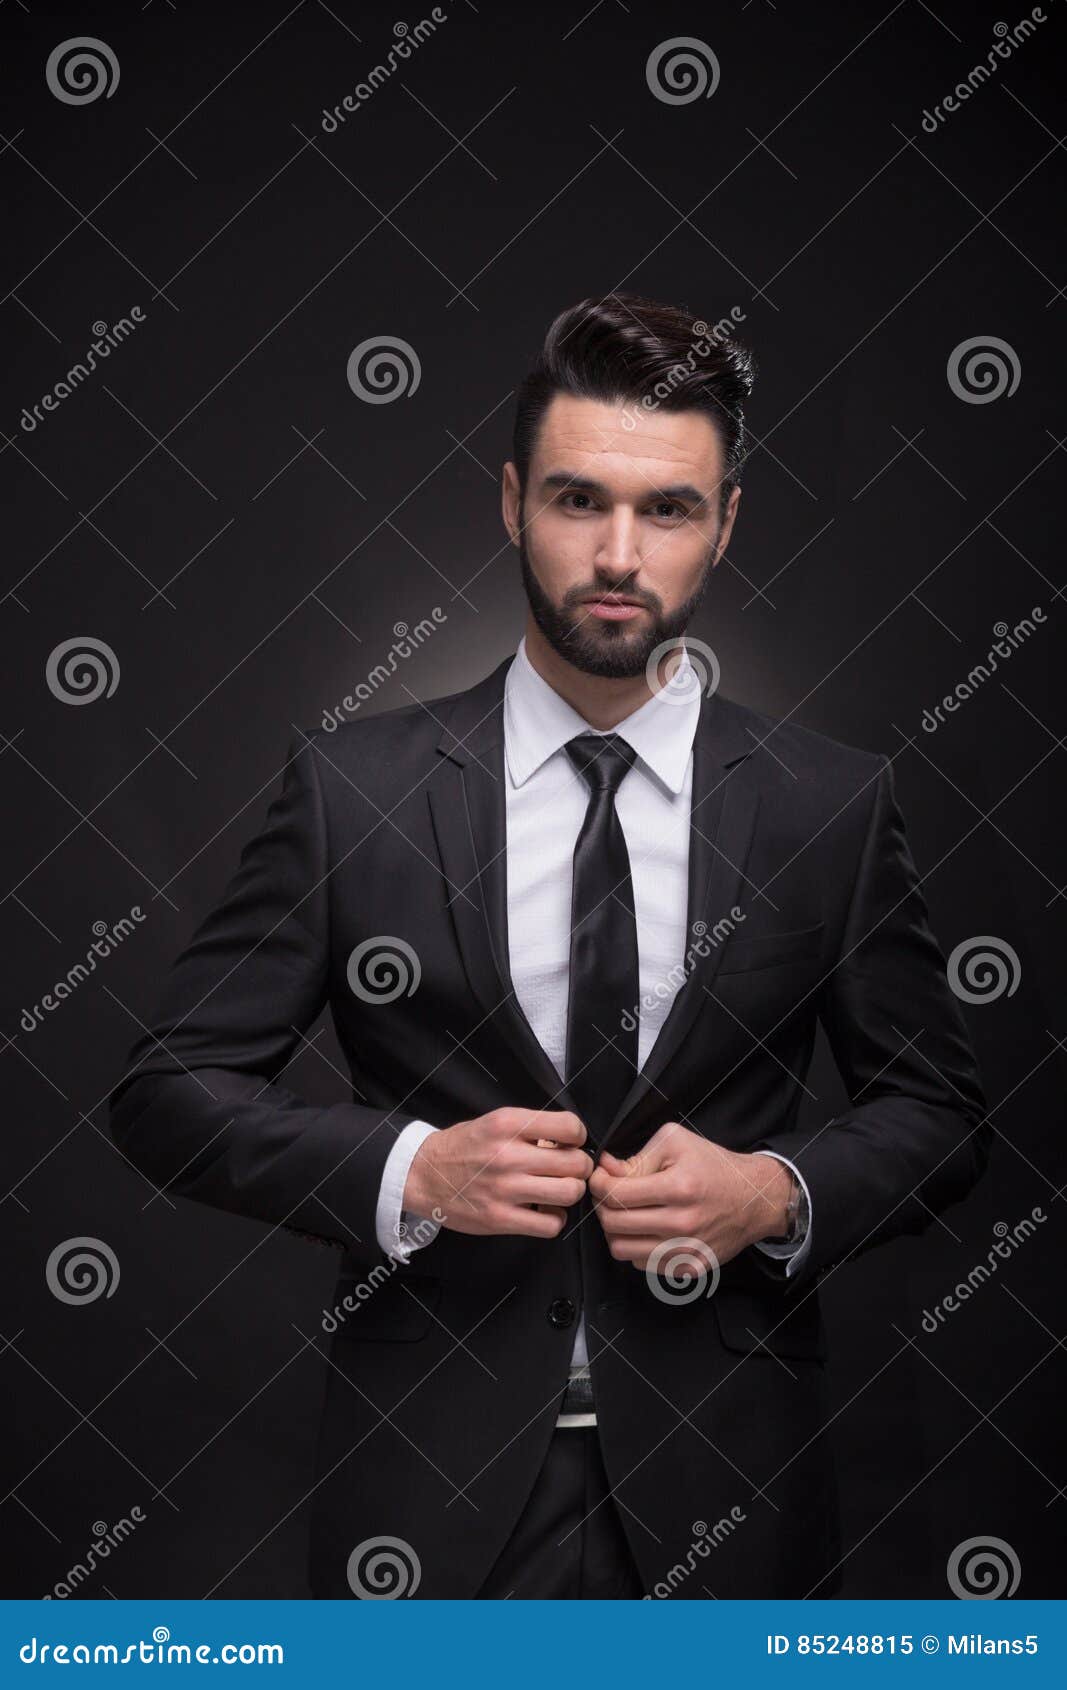 Young Man Elegant Suit, Looking At Camera, Black Background Stock Image ...